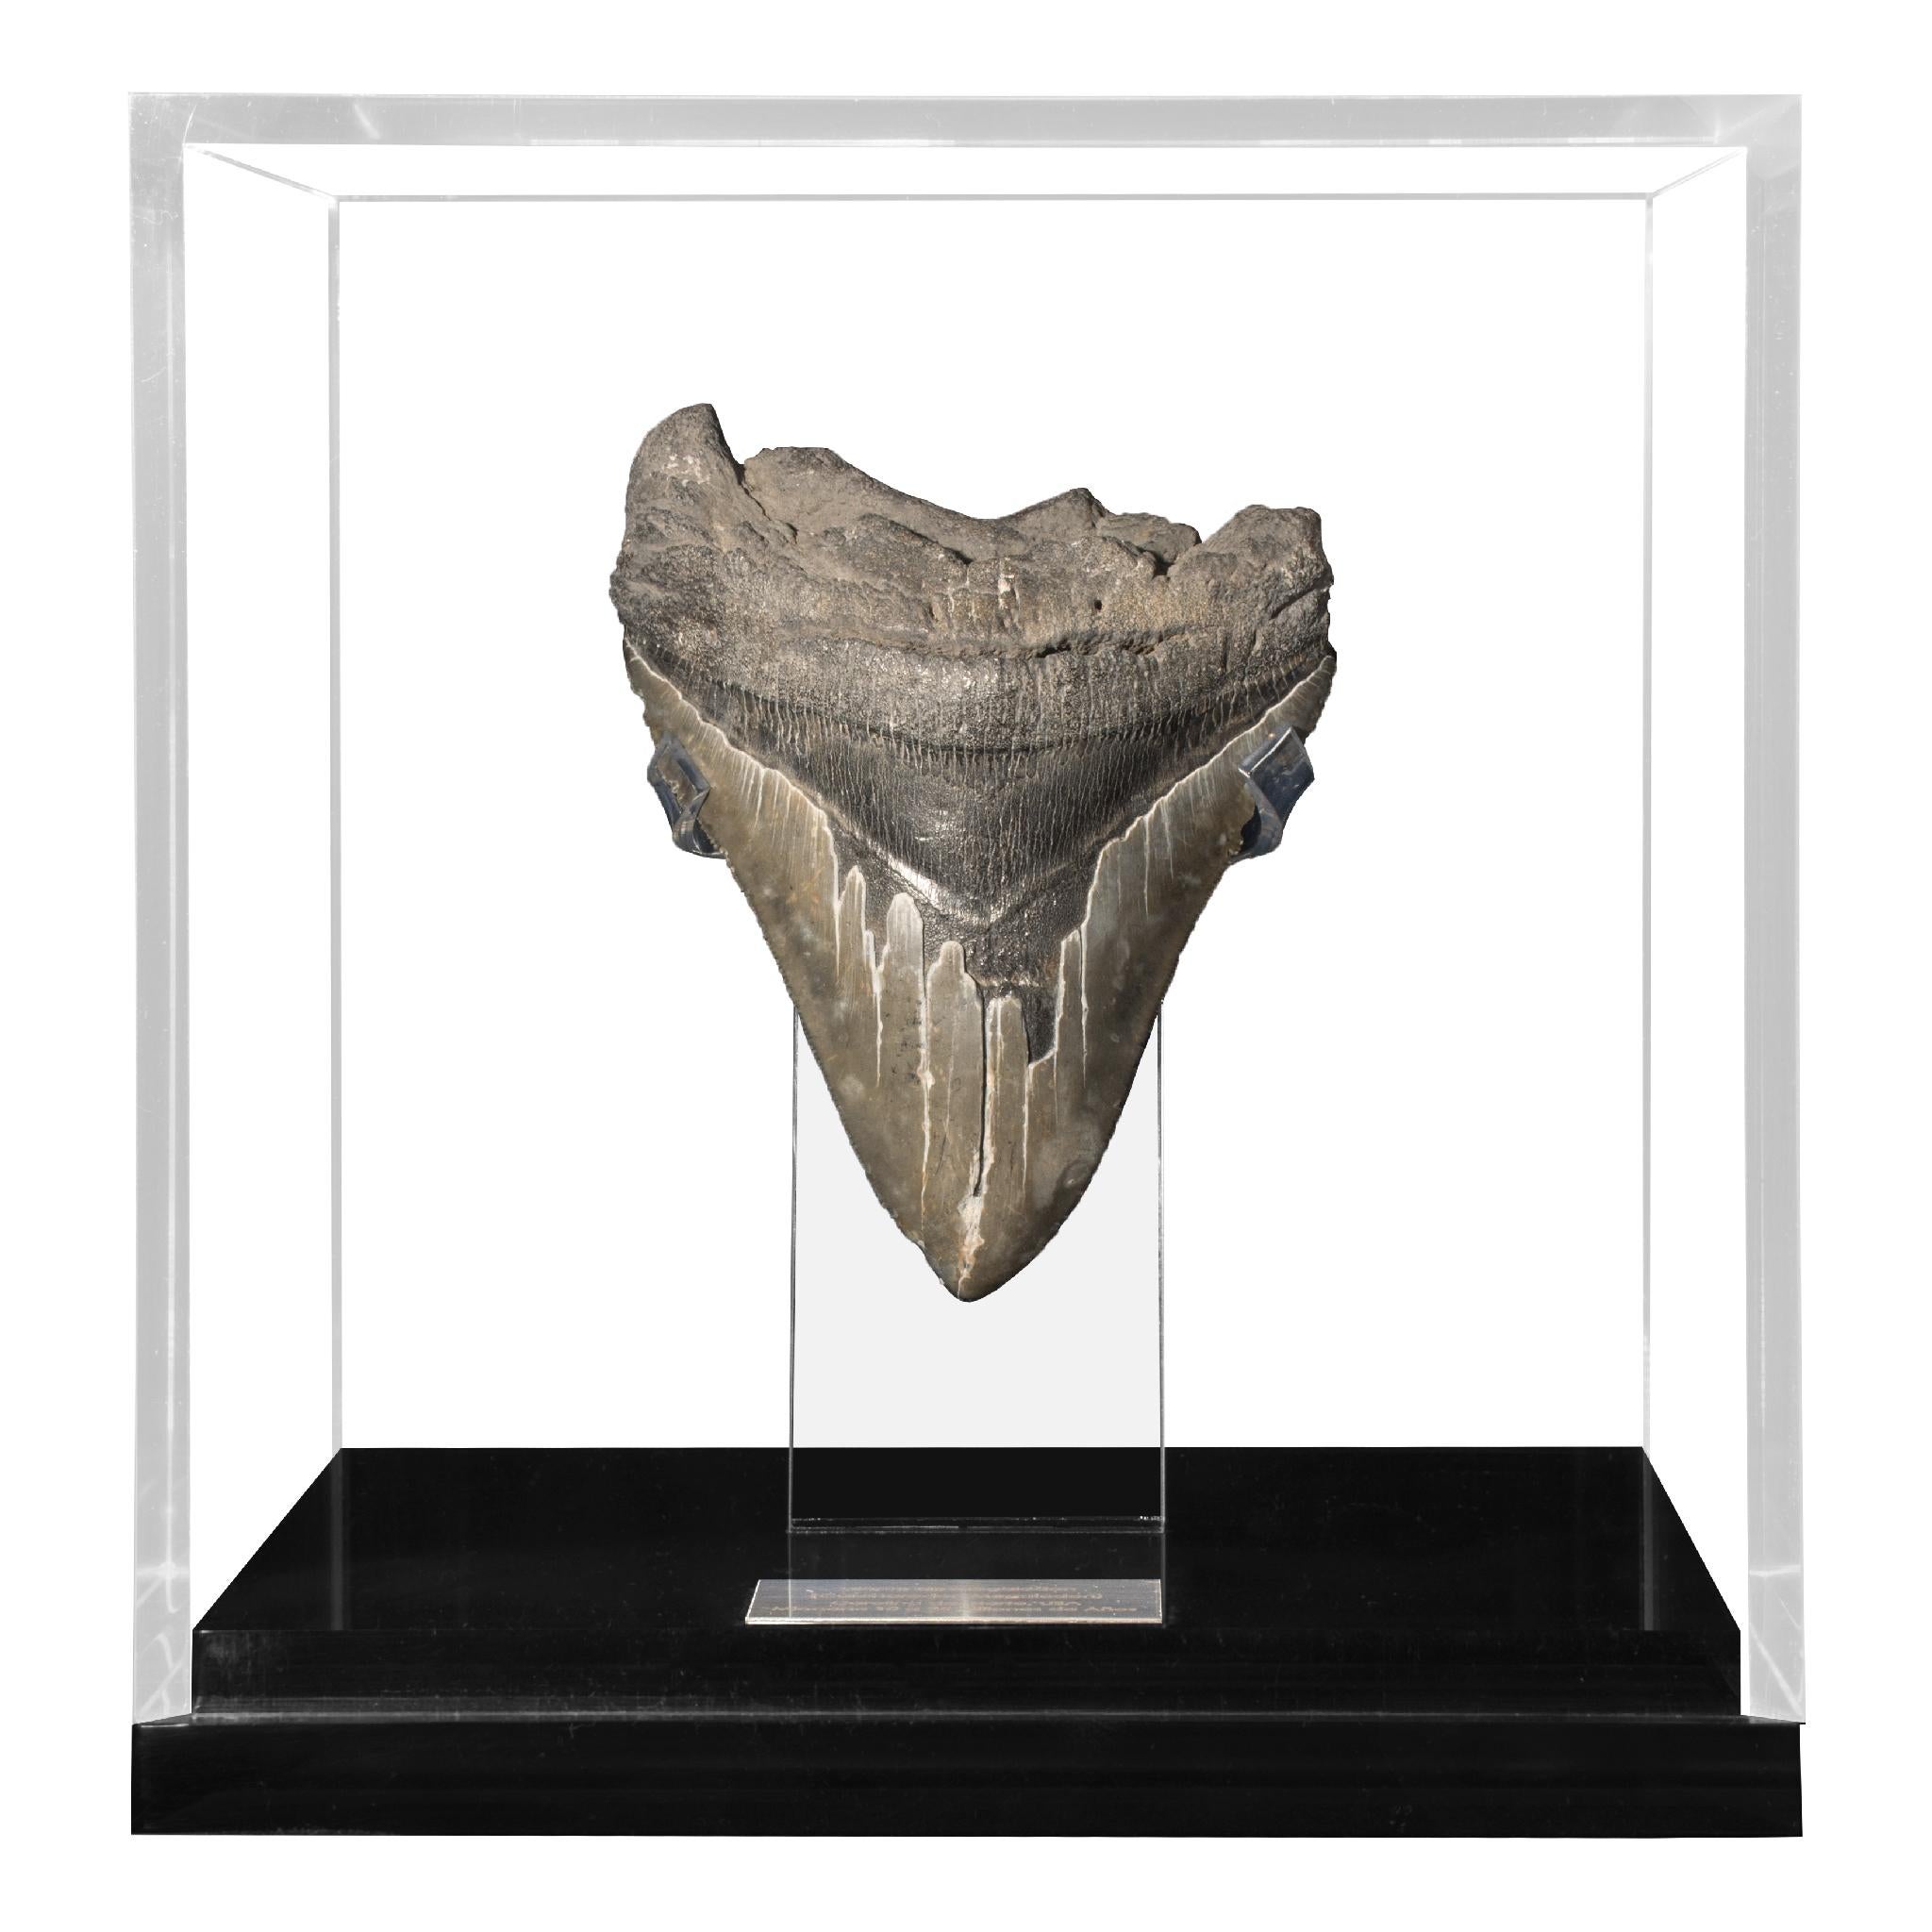 Megalodon, is an extinct species of sharks that lived 10 to 25 million years ago, during the Miocene period.
It´s considered the biggest predator that has ever lived, reaching lengths up to 60 feet and estimated weight of 60 tons. Their jaw could